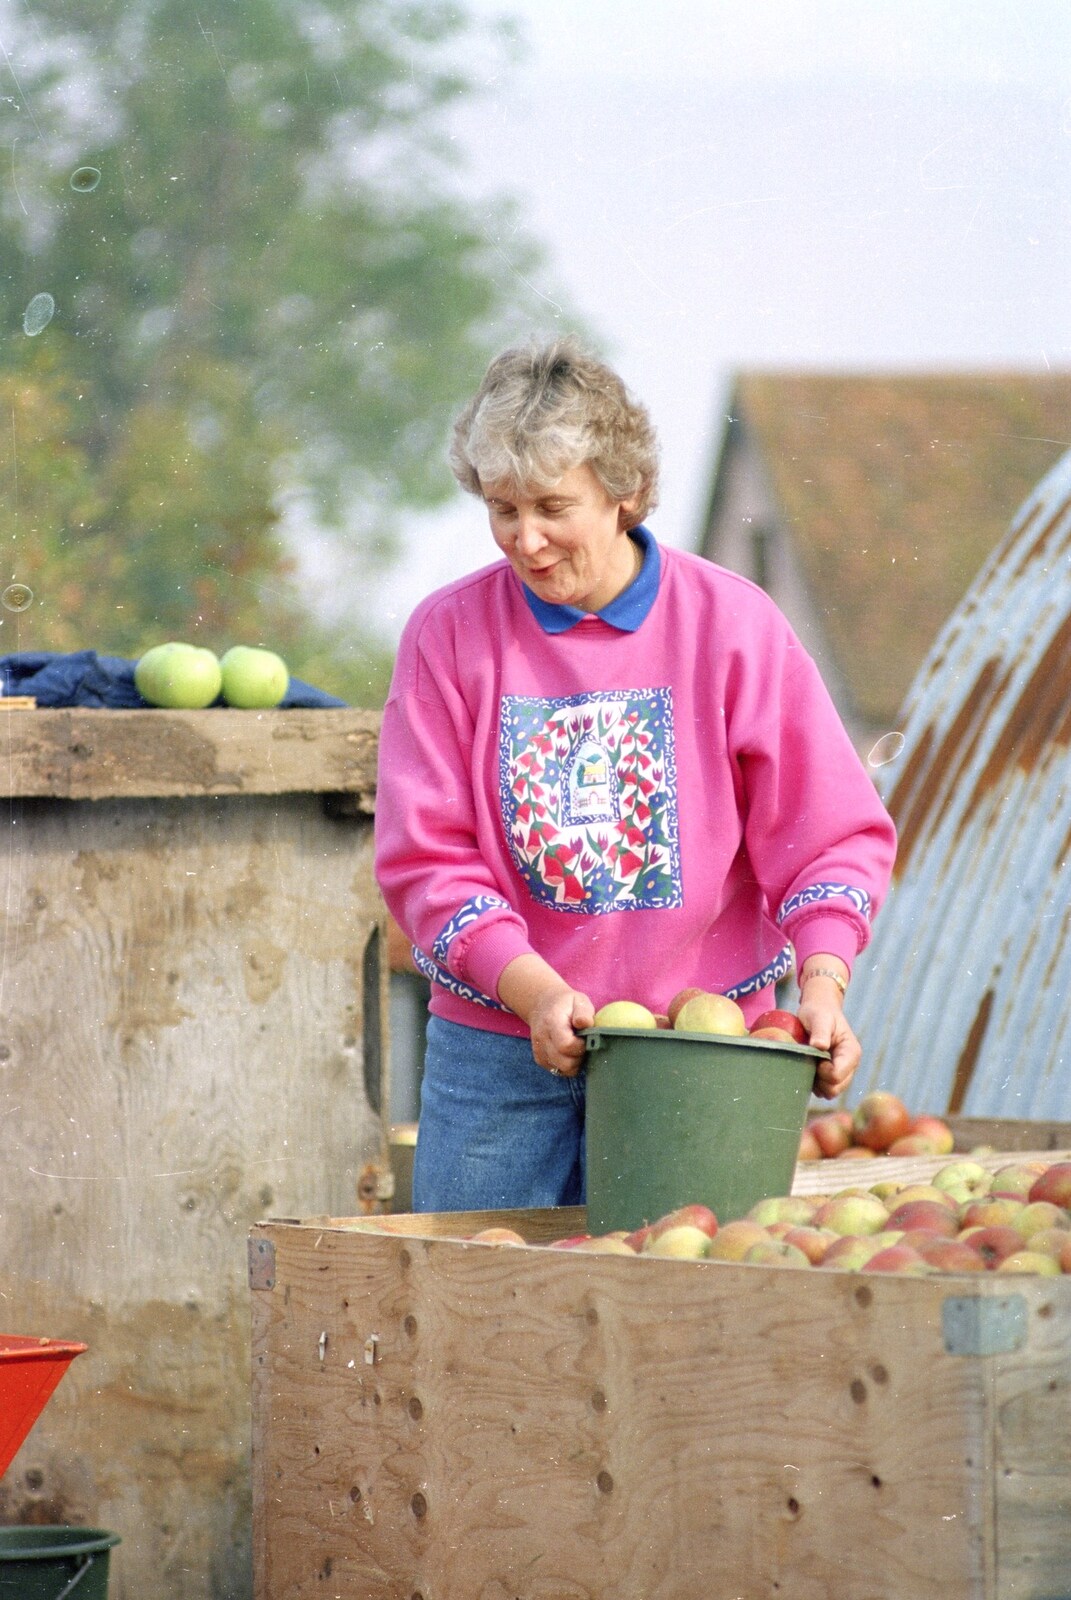 Linda with a bucket of apples from Cider Making (without Rosie), Stuston, Suffolk - 23rd September 1994